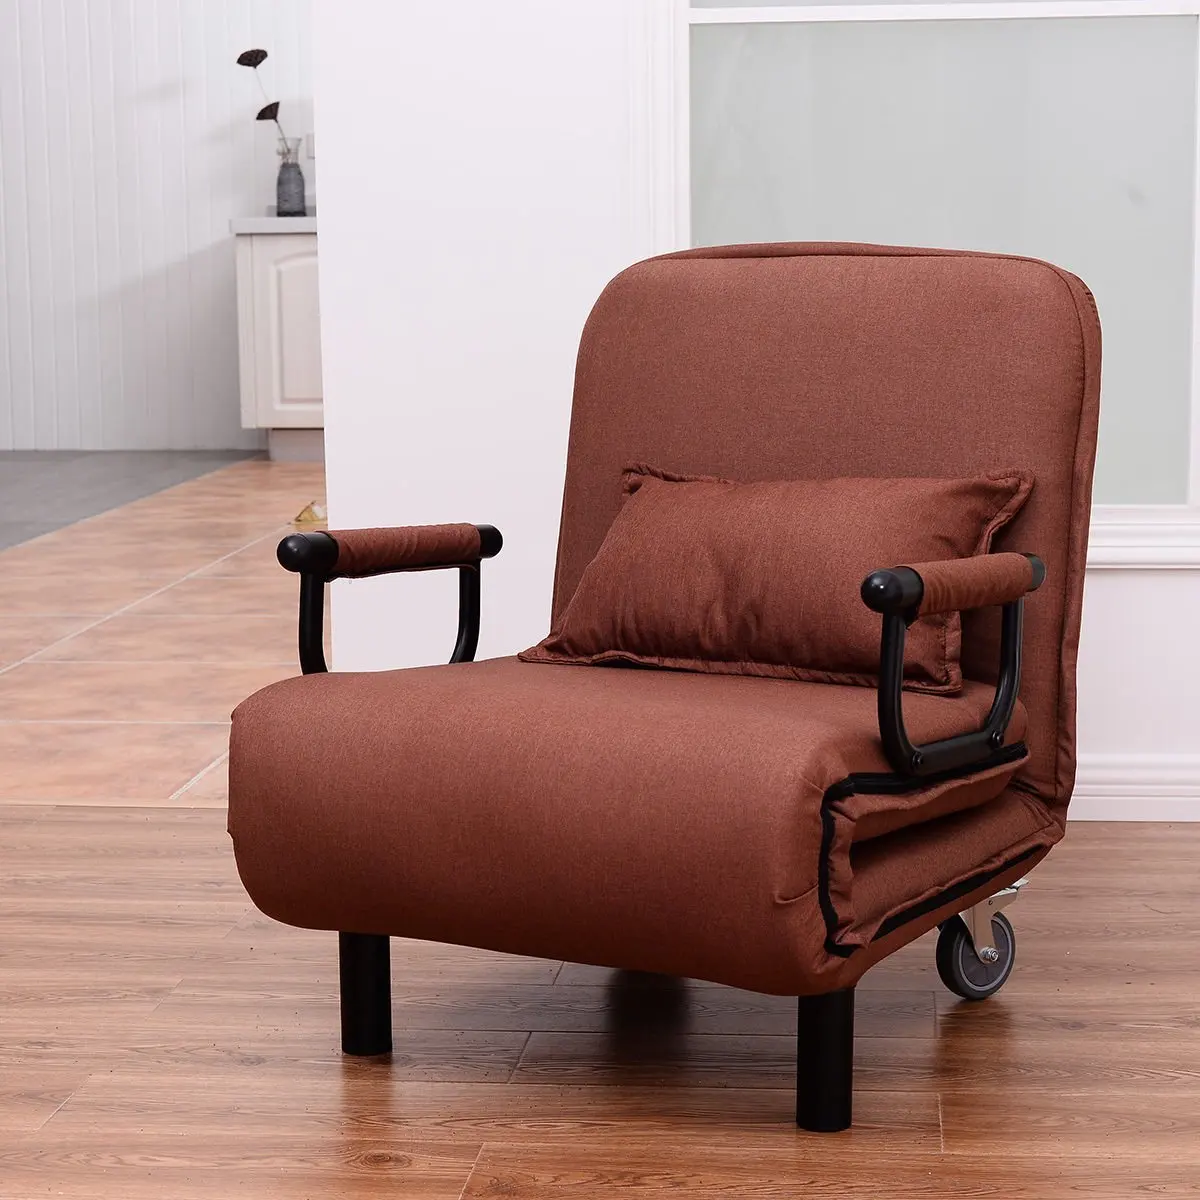 Buy Folding Convertible Sofa Bed Arm Chair Sleeper Leisure Recliner